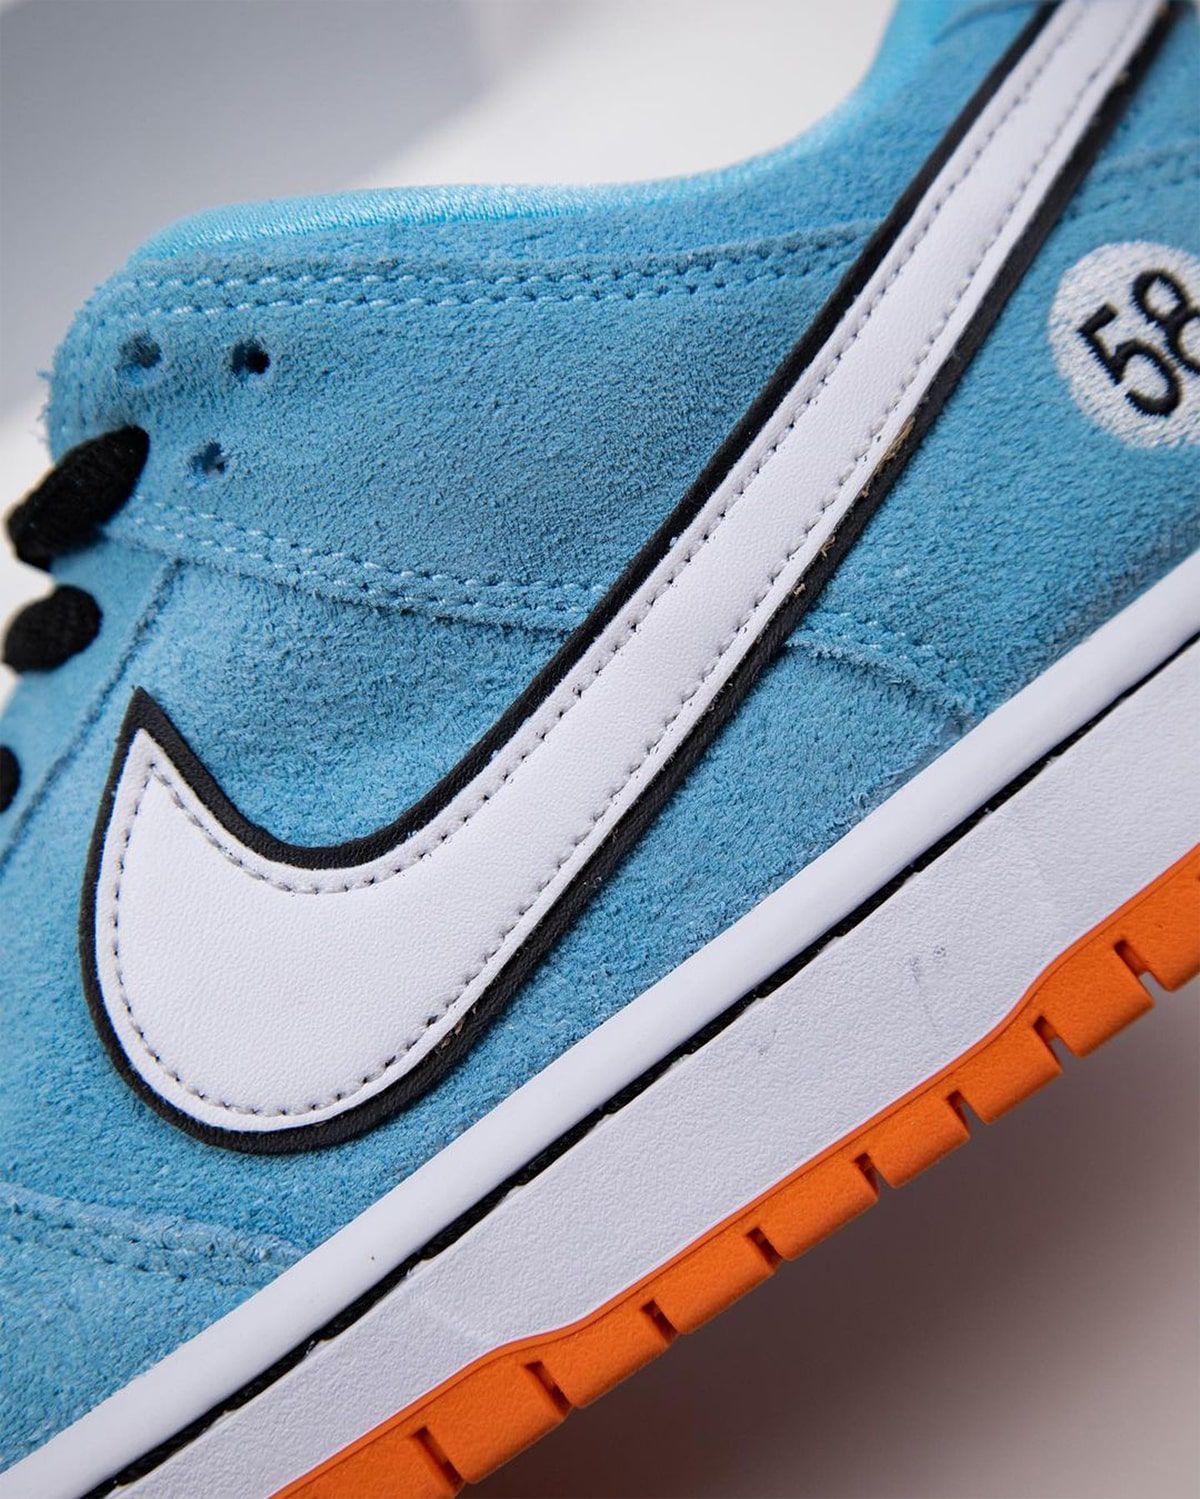 Where to Buy the Nike SB Dunk Low “Gulf” | House of Heat°